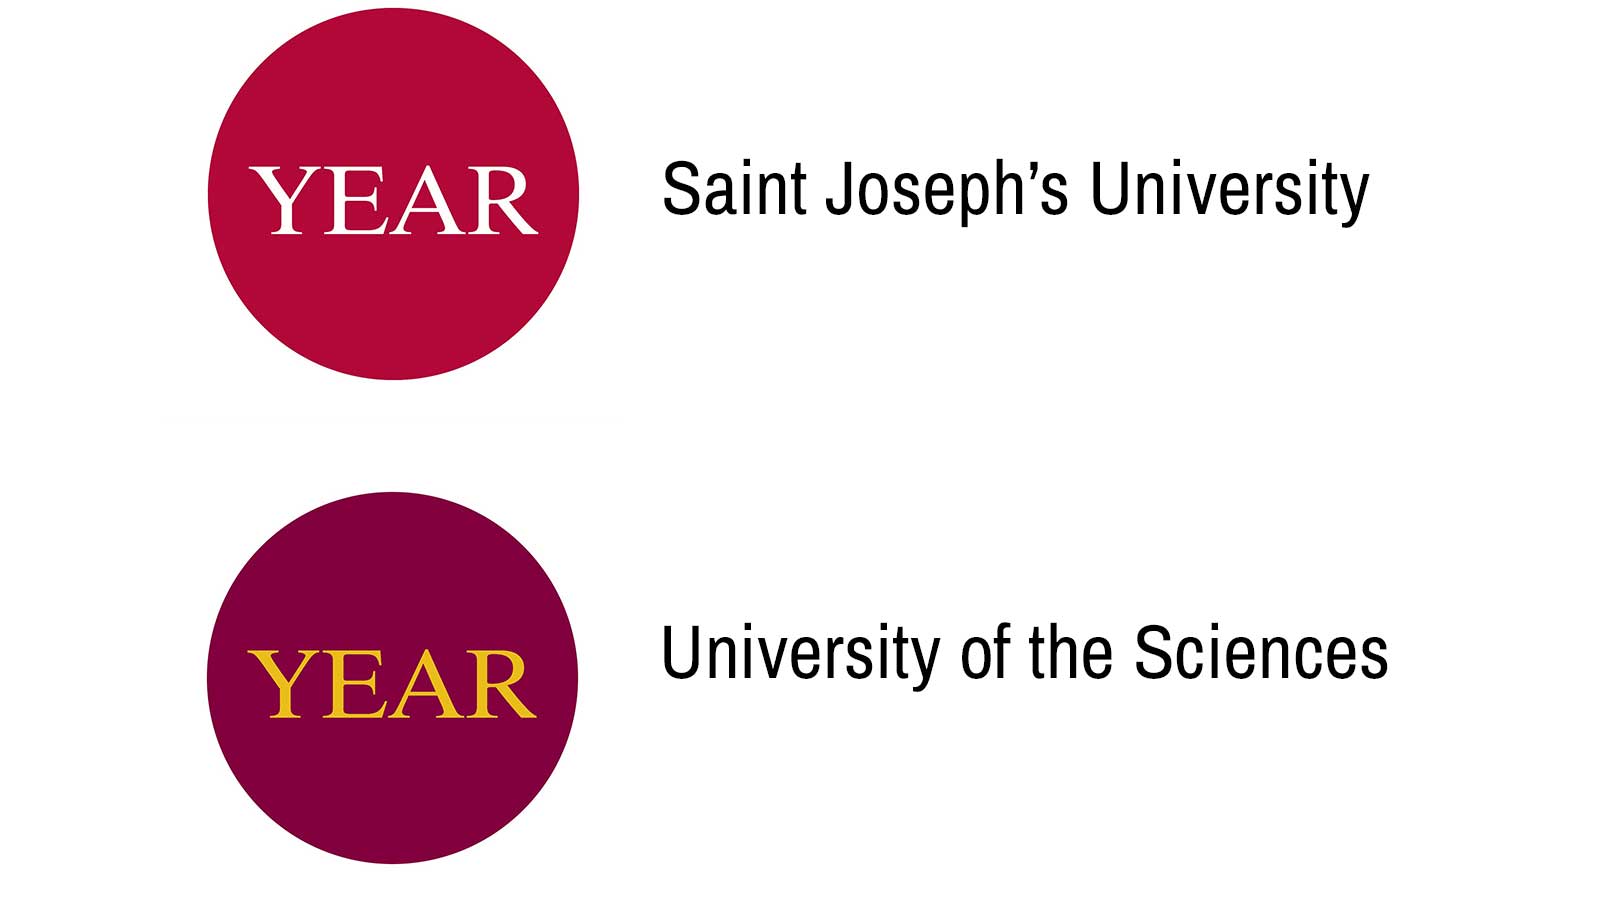 a red circle signifying saint joseph's university and a maroon circle signifying university of the sciences